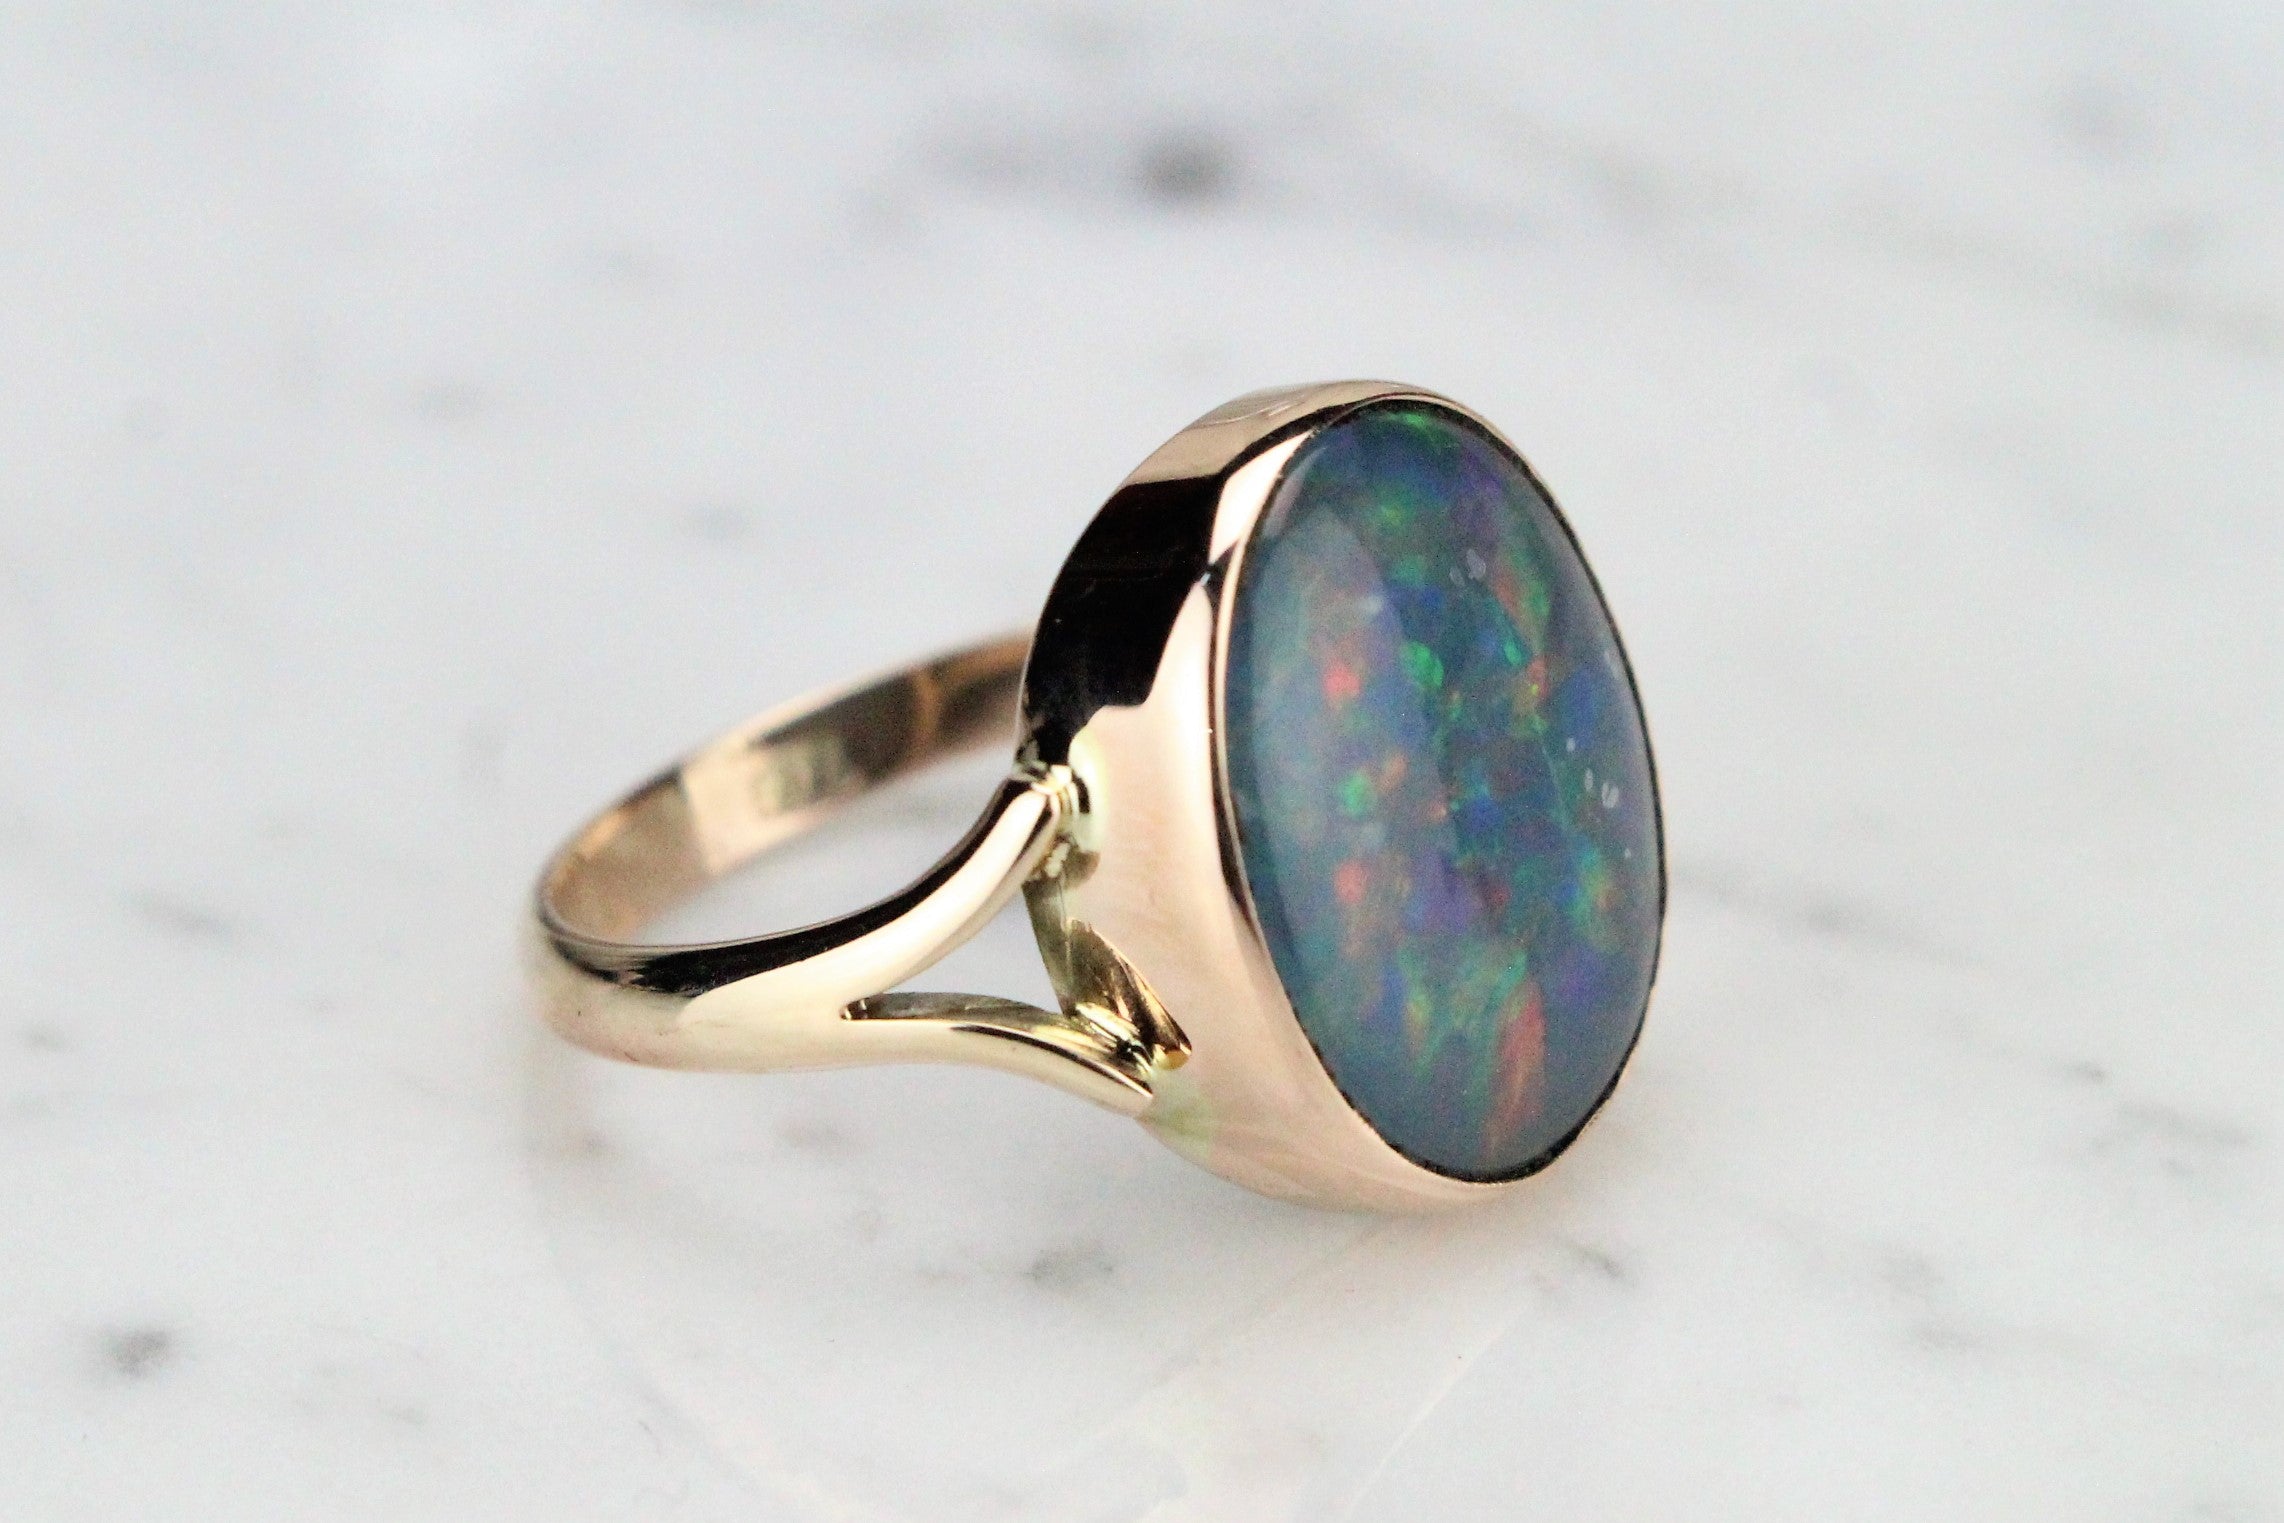 VINTAGE c1940 OPAL DOUBLE RING ON 9ct YELLOW GOLD - Rock & Vestige